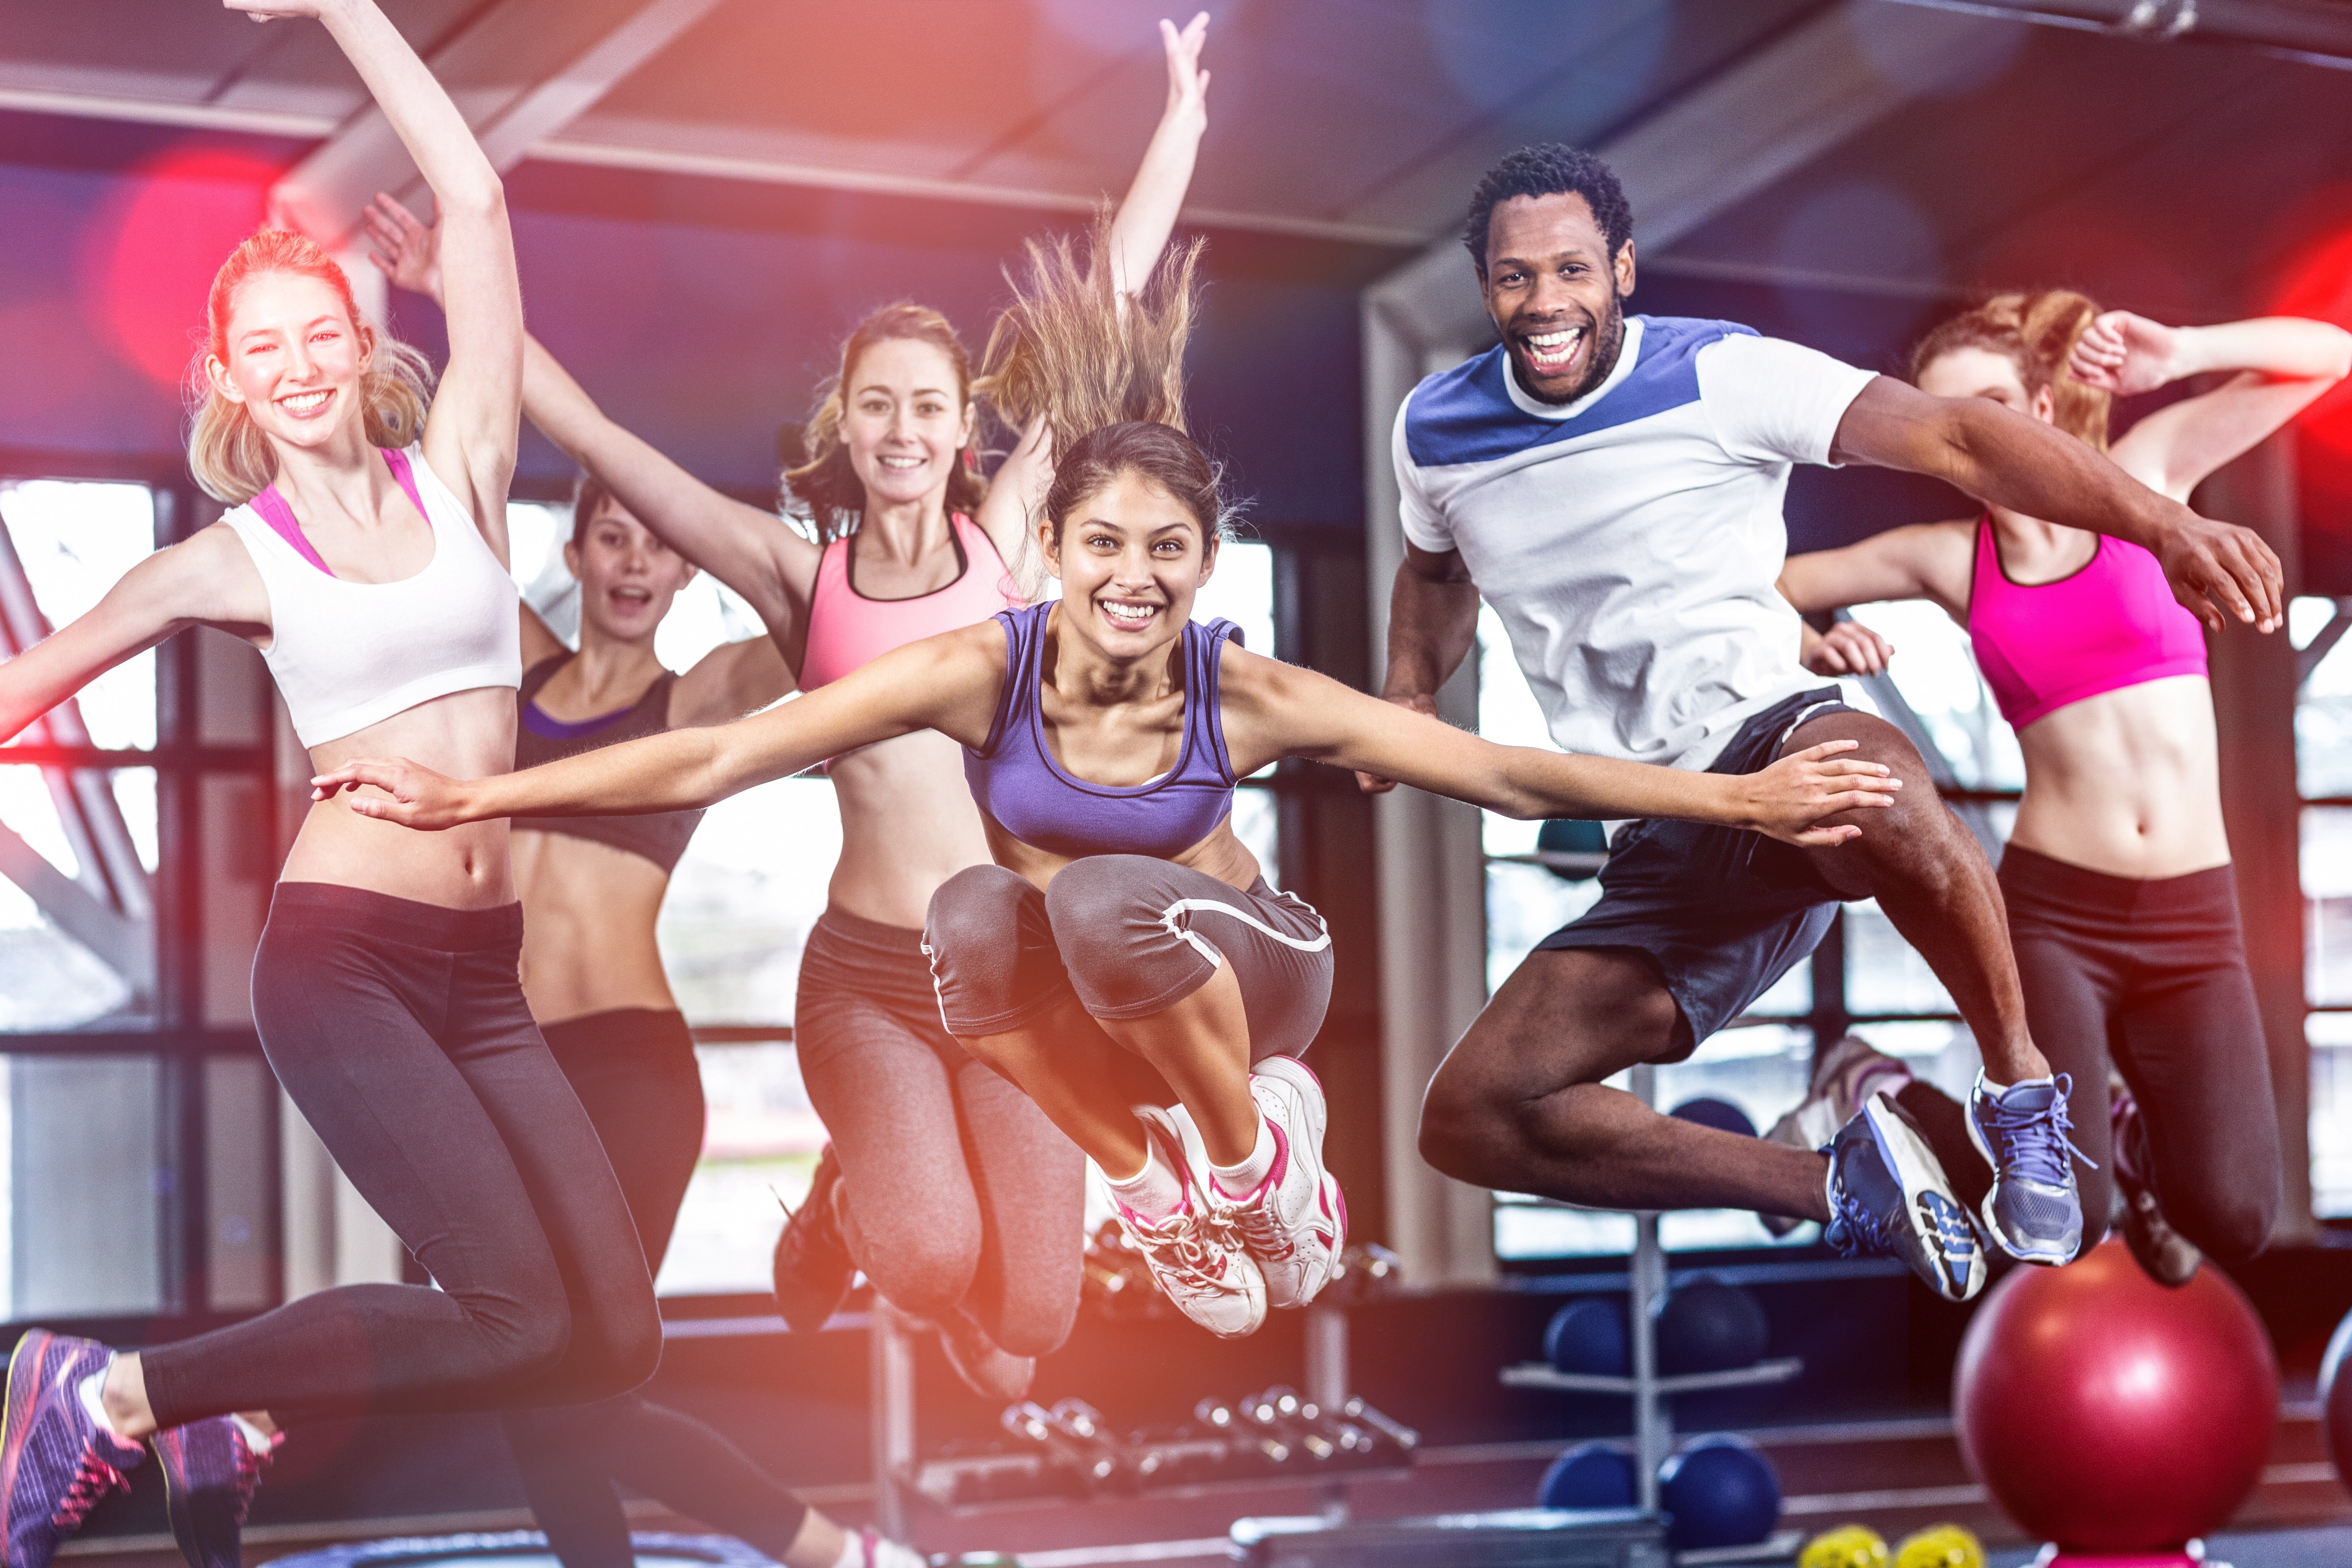 How to Motivate and Inspire Group Fitness Class Participants